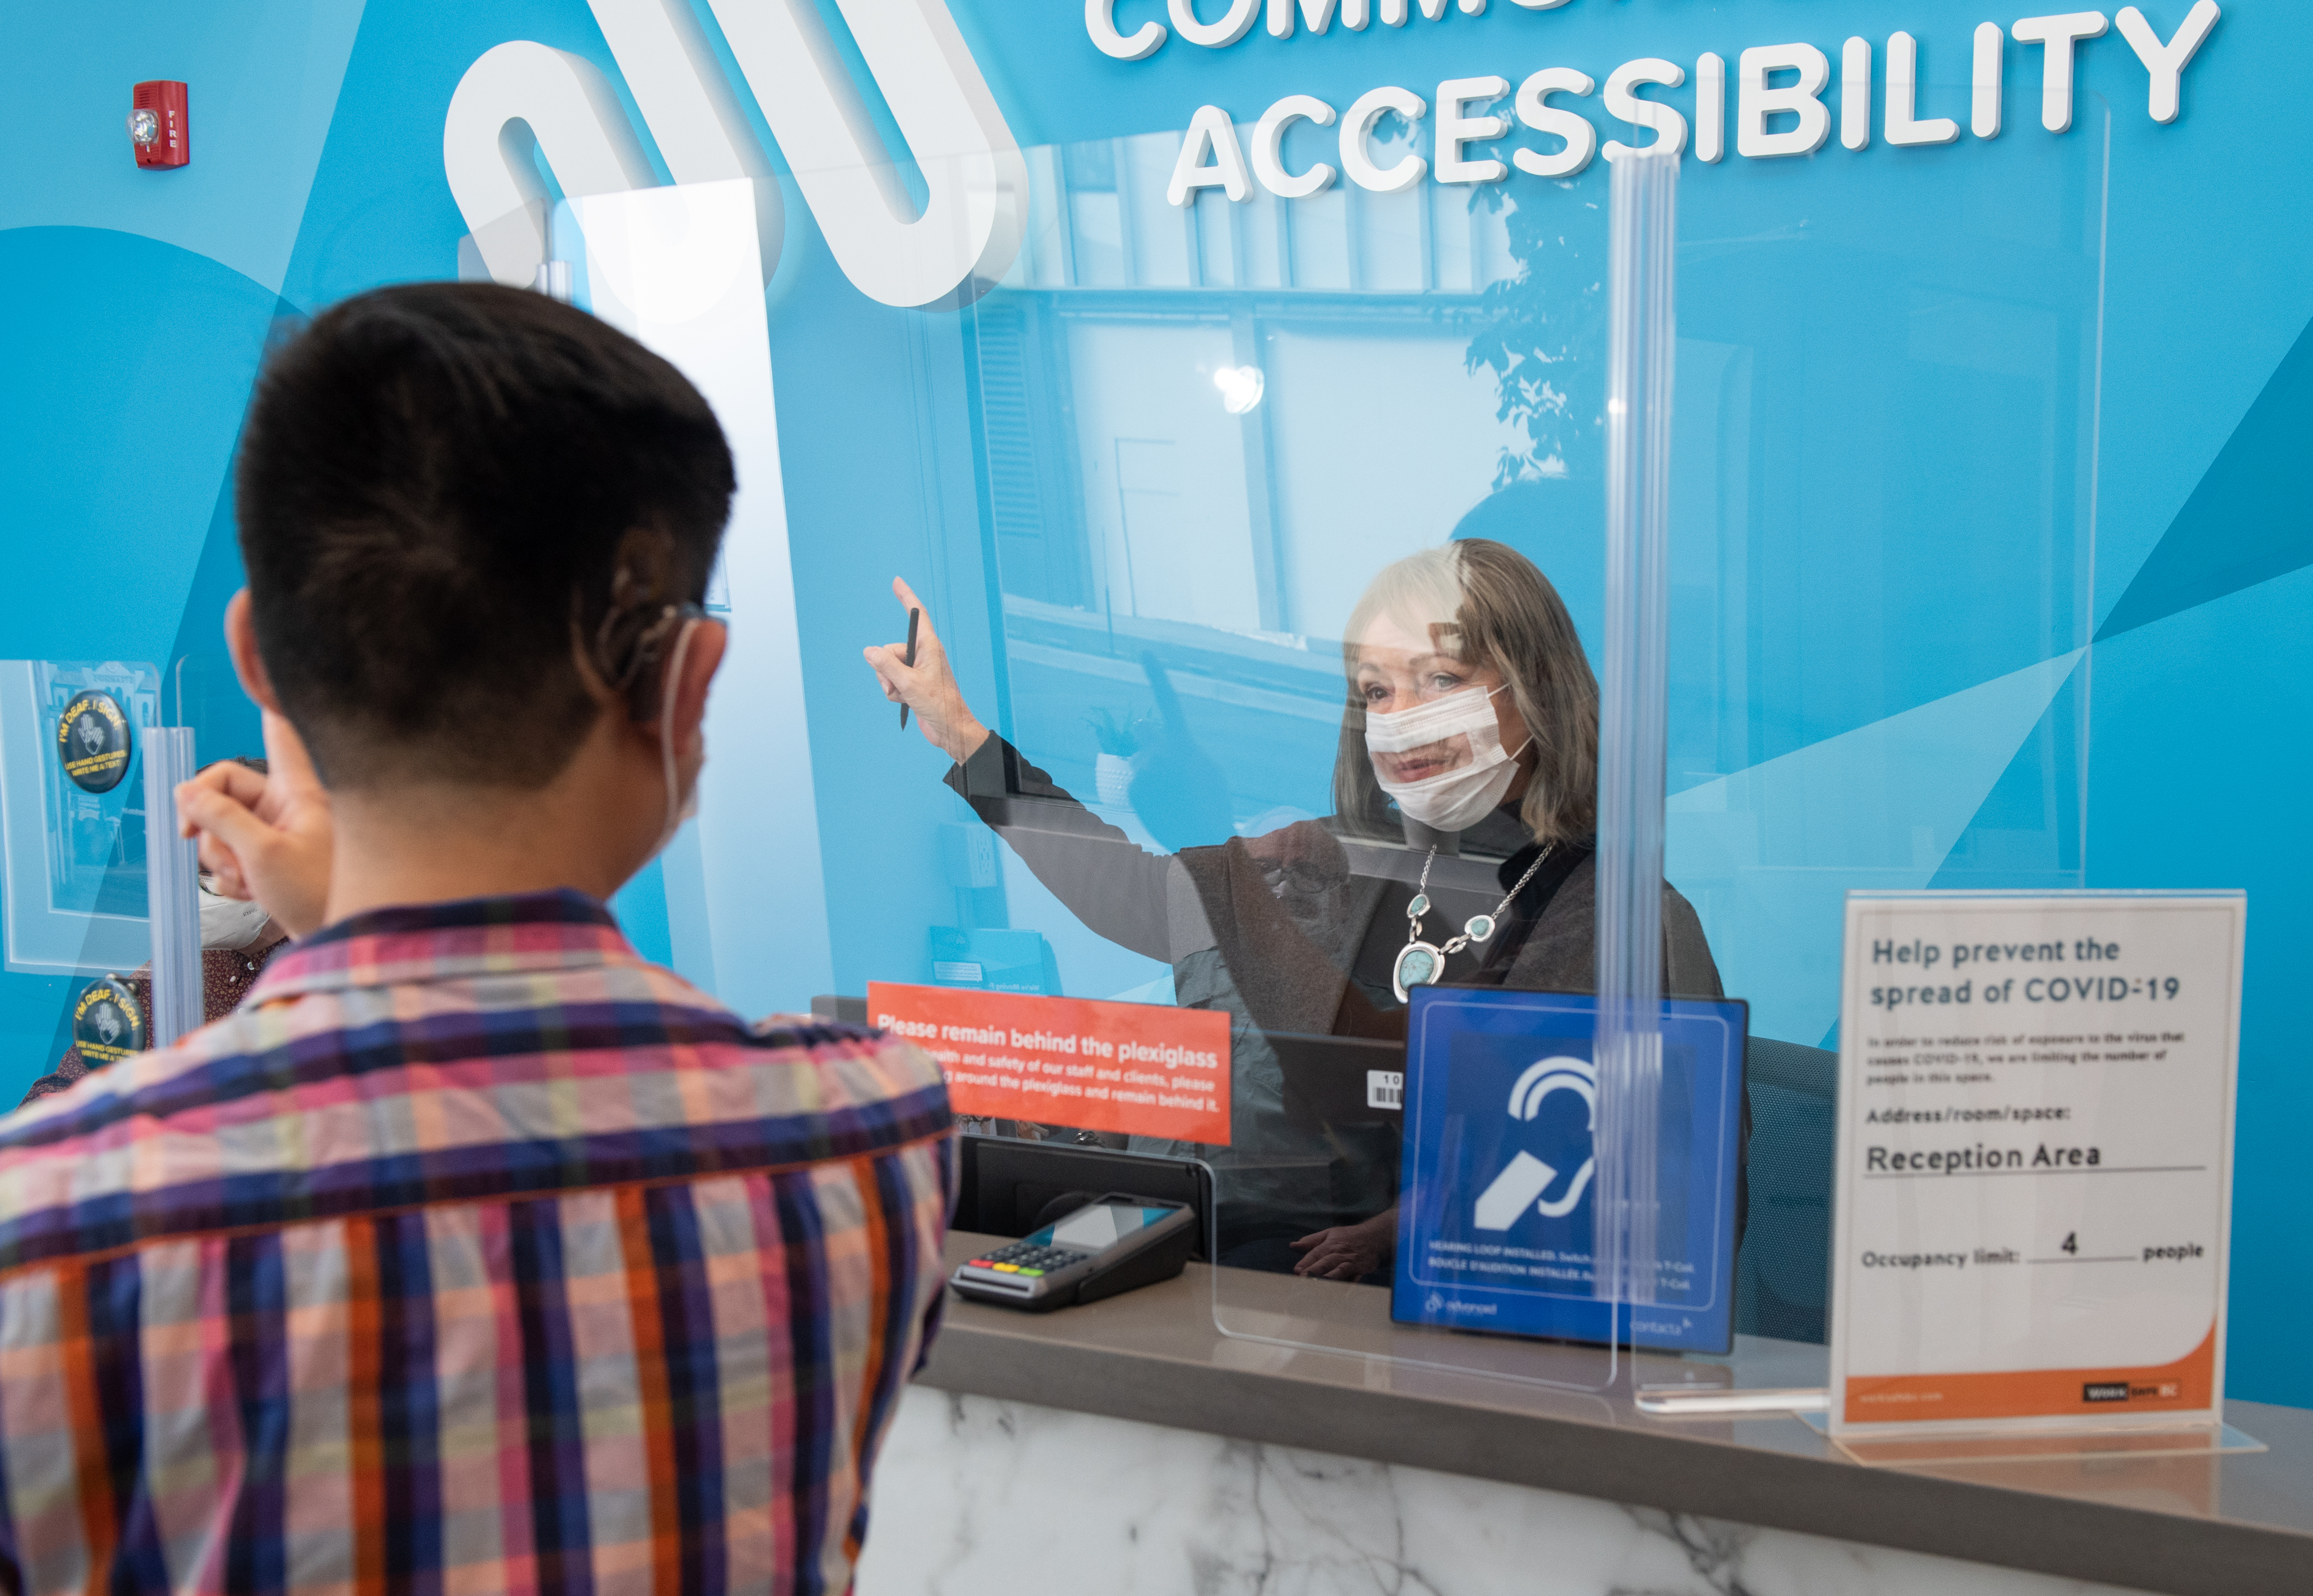 Man asking for information from a female receptionist behind plexiglass. She is wearing a clear face mask and is pointing beside her. There is a blue sign on the desk that has a white icon indicating the building is accessible for people with hearing loss.